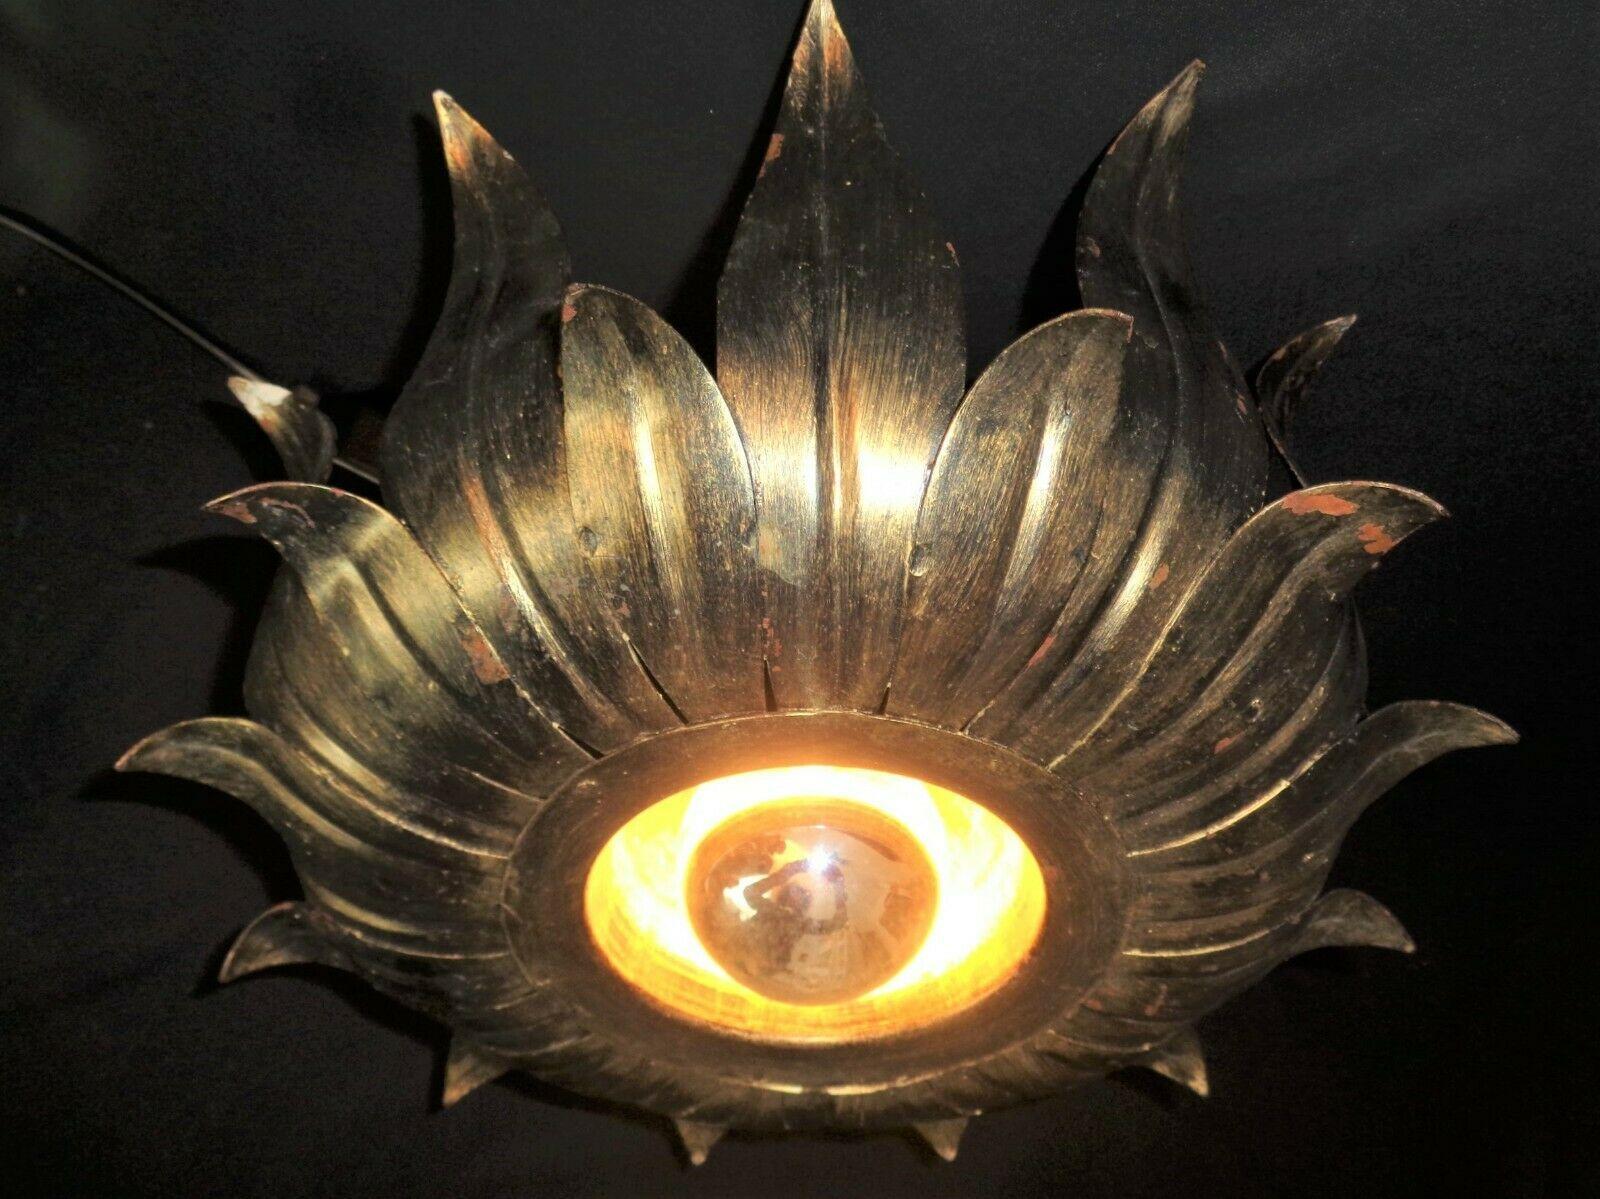 Quite Unique Treasure from Hans Kogl. c1950s Mid Century Modern Radiant Sunray Ceiling Flush Mount Fixture. Gilt formed metal with center diffused Light bulb - light source.